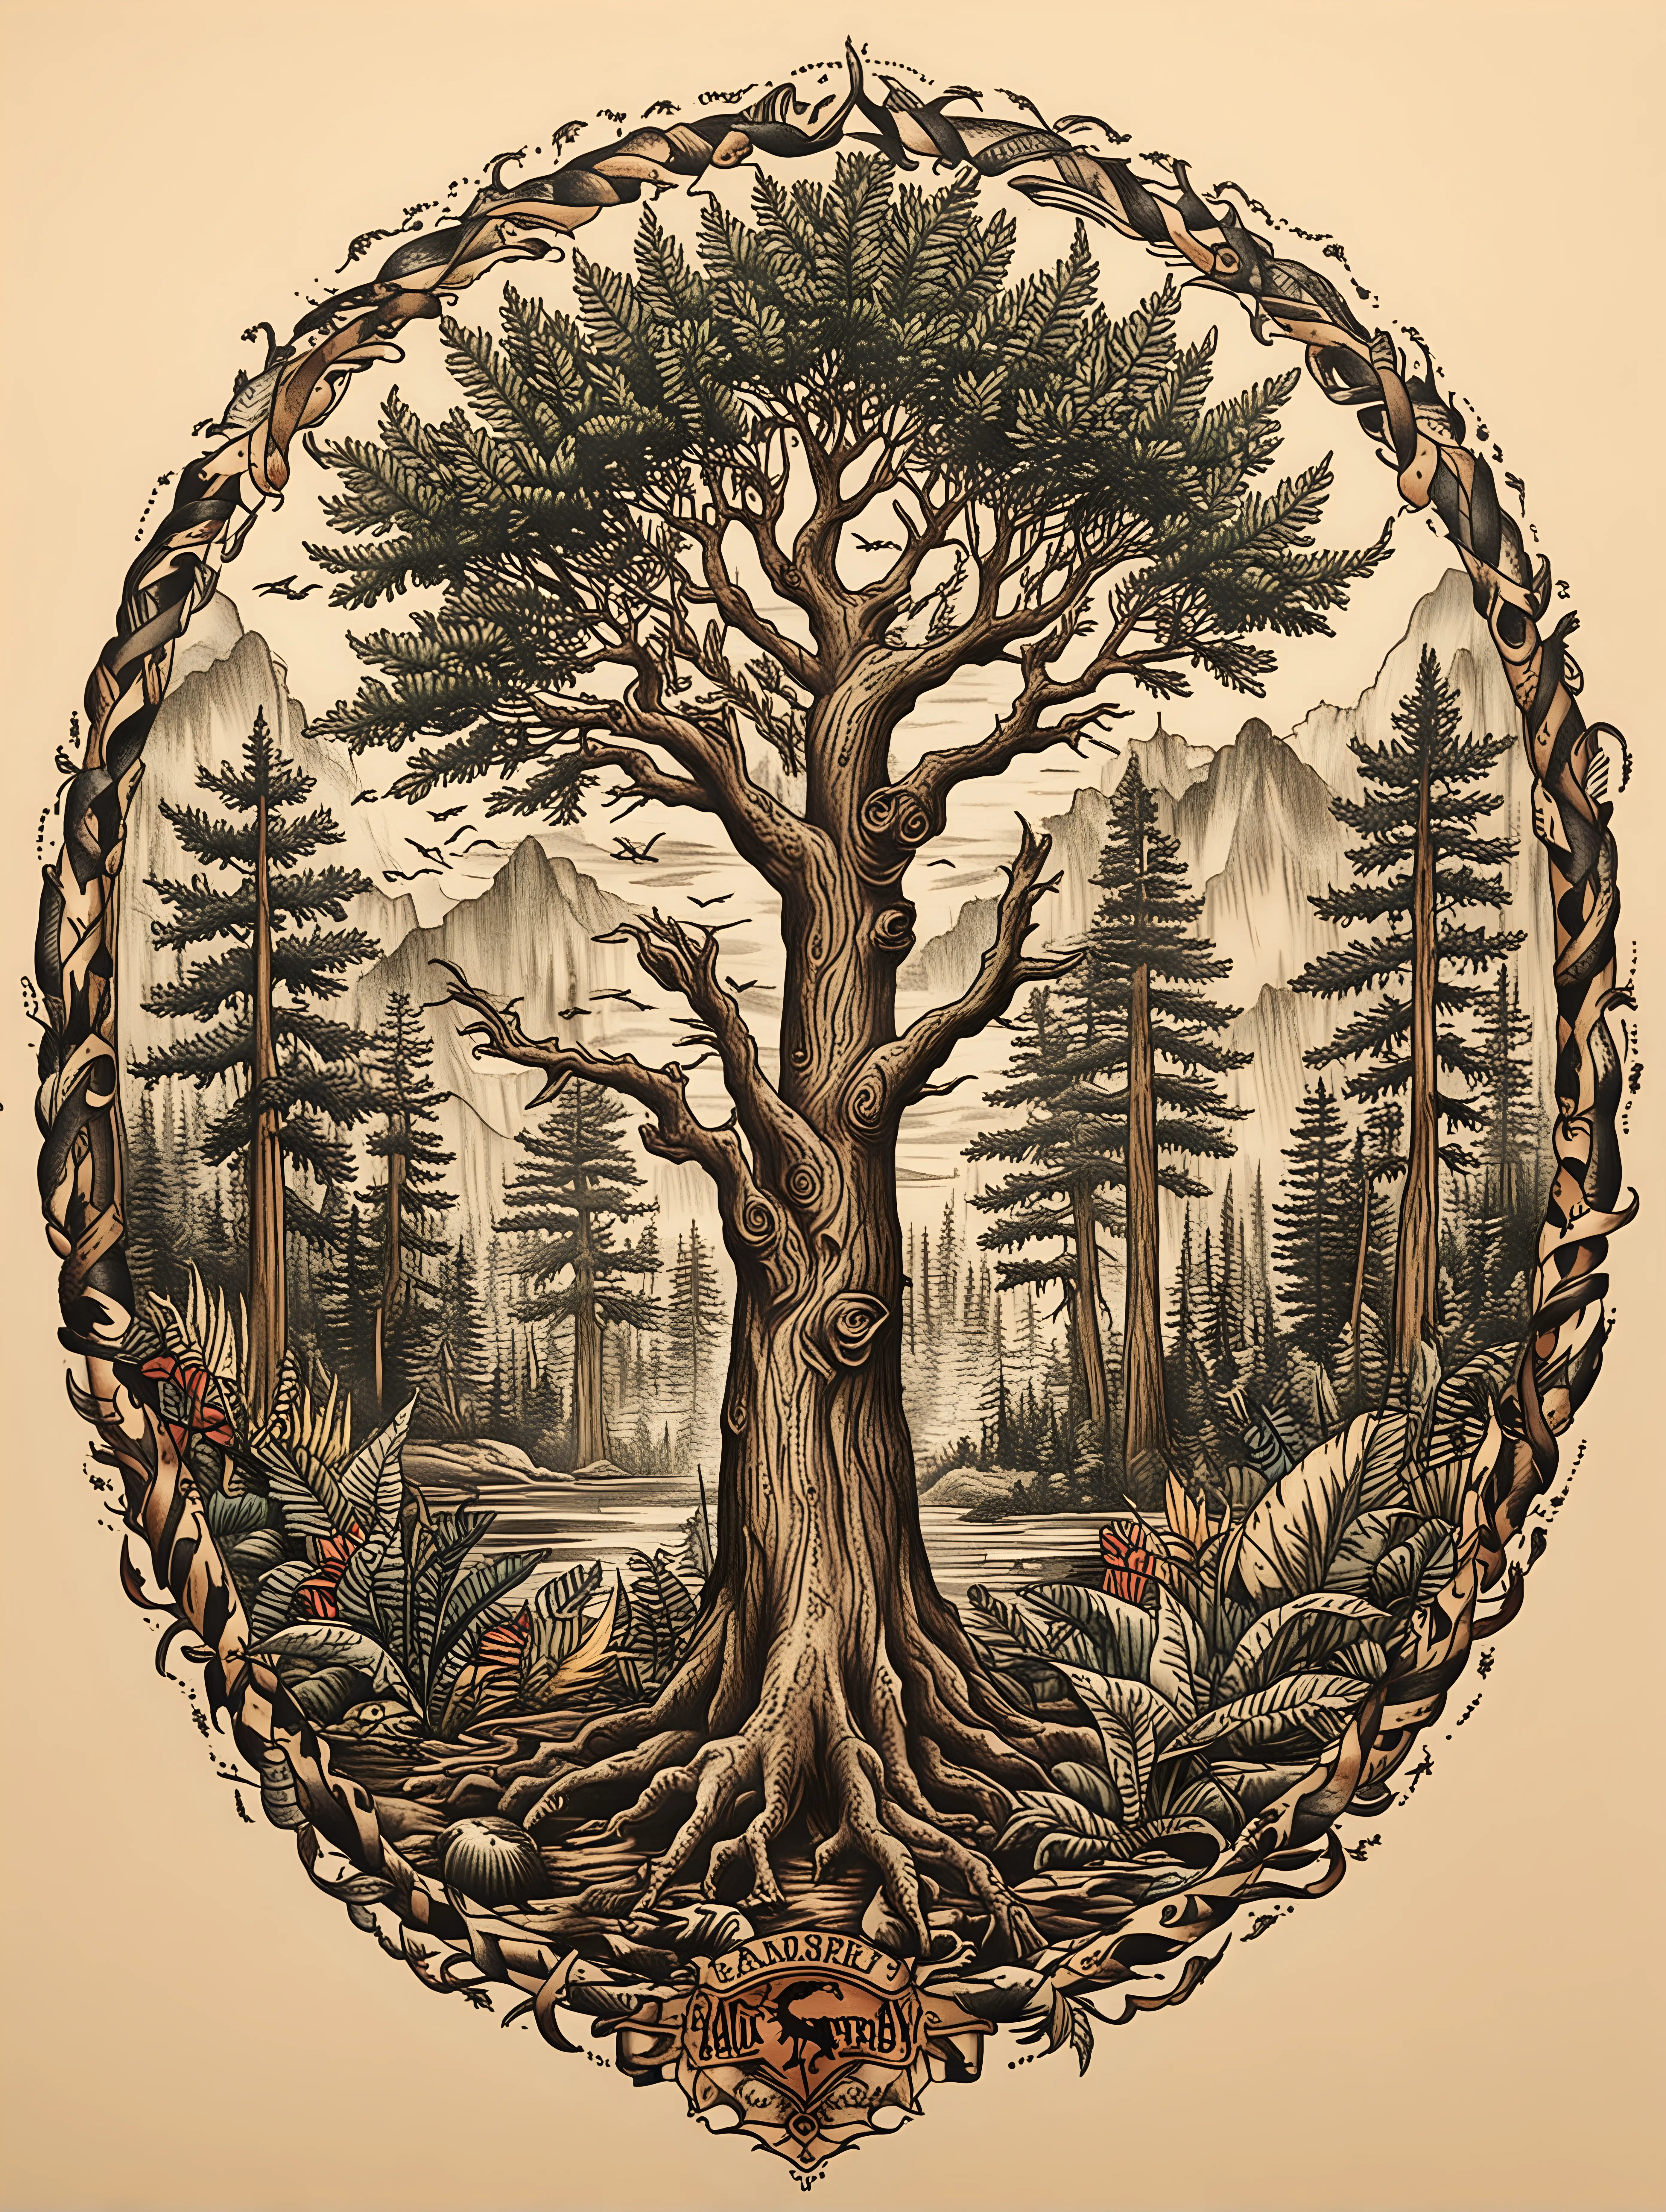 Jurassic Trees Tattoo Design in Sailor Jerry Style